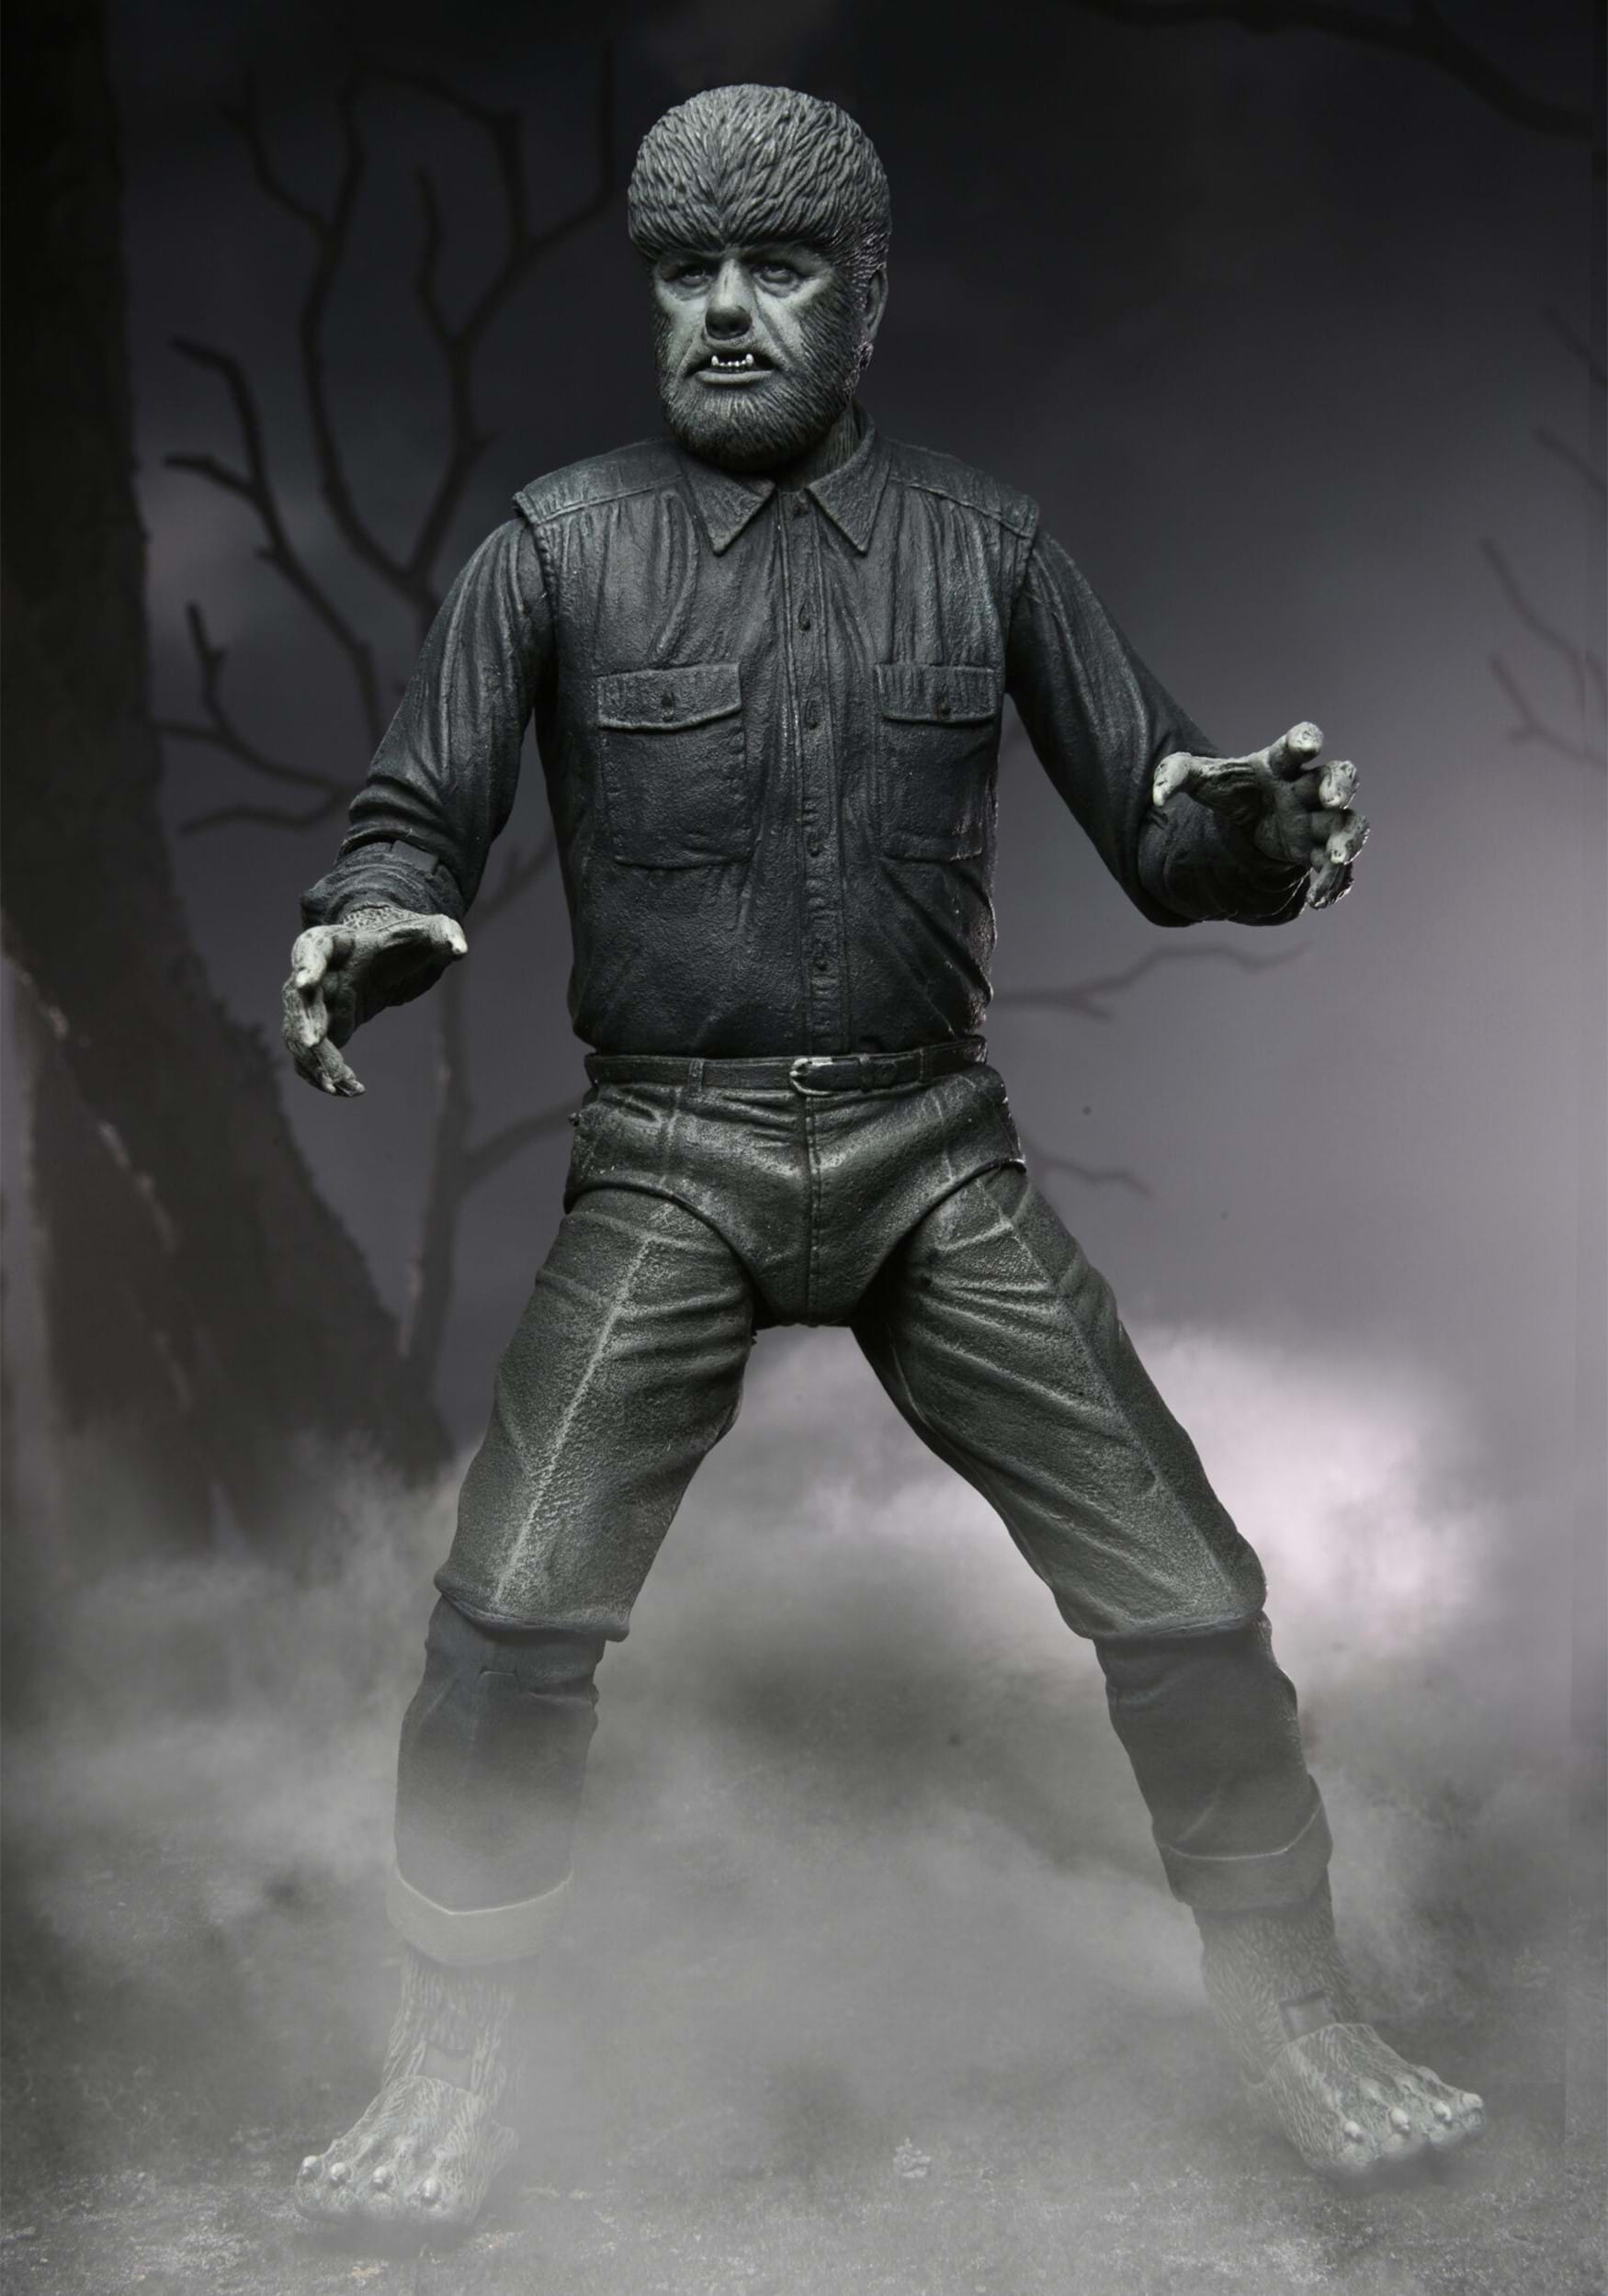 7" Universal Monsters Scale Action Figure– Ultimate Wolf Man